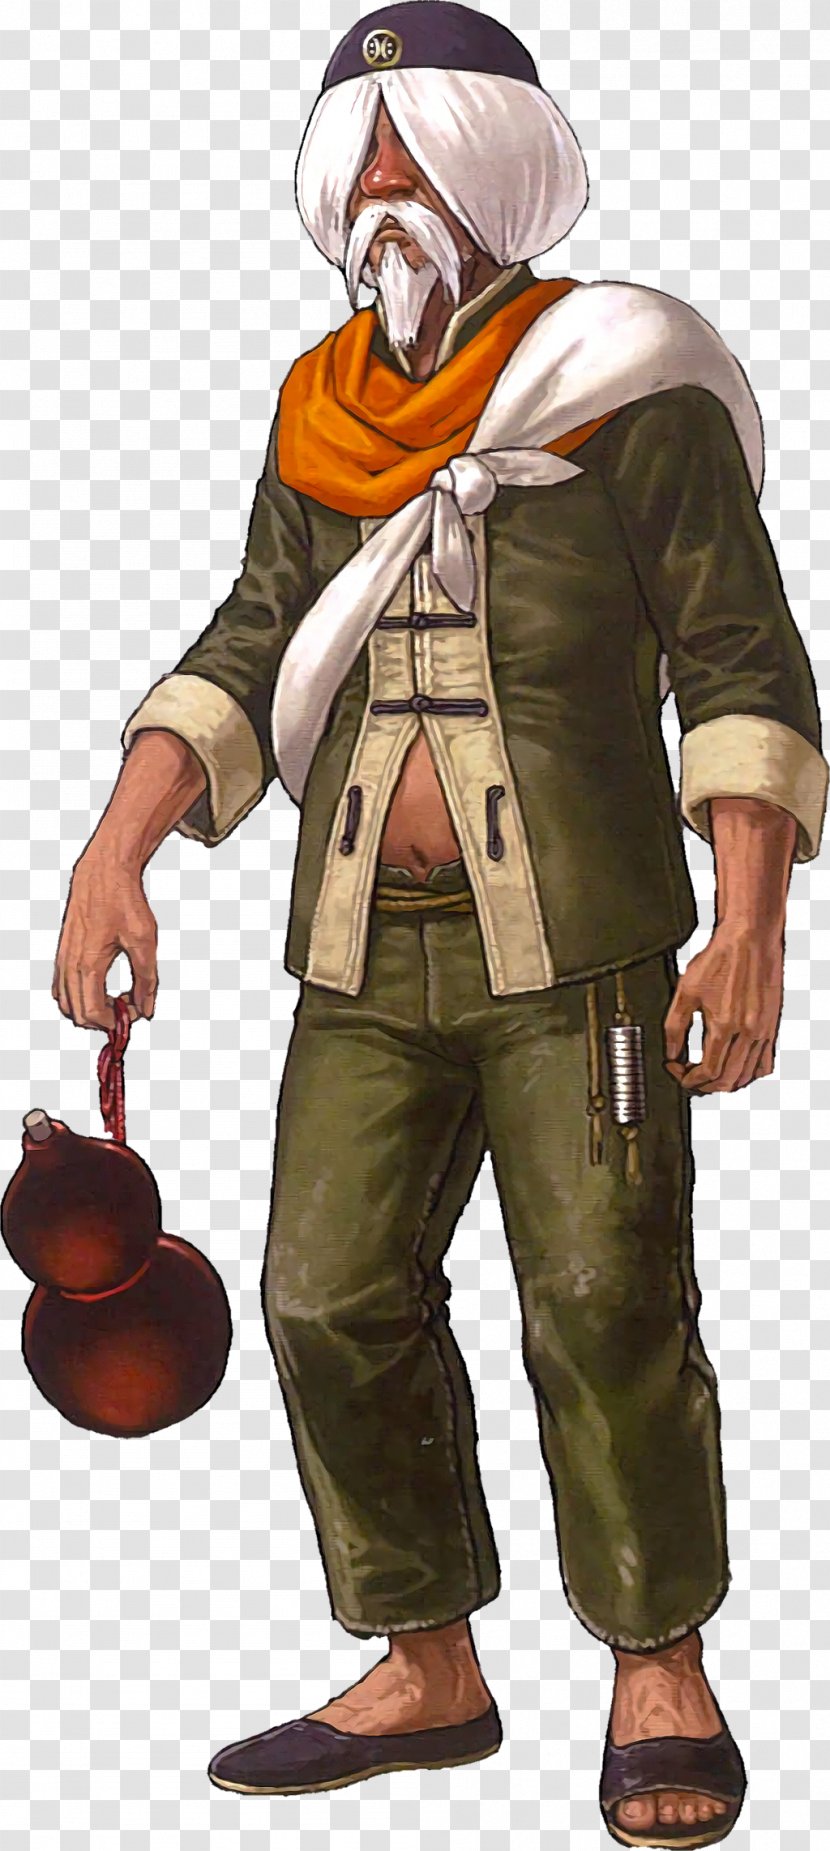 The King Of Fighters XIV '98 XIII 2001 '94 - Fictional Character - Chin Poster Design Transparent PNG